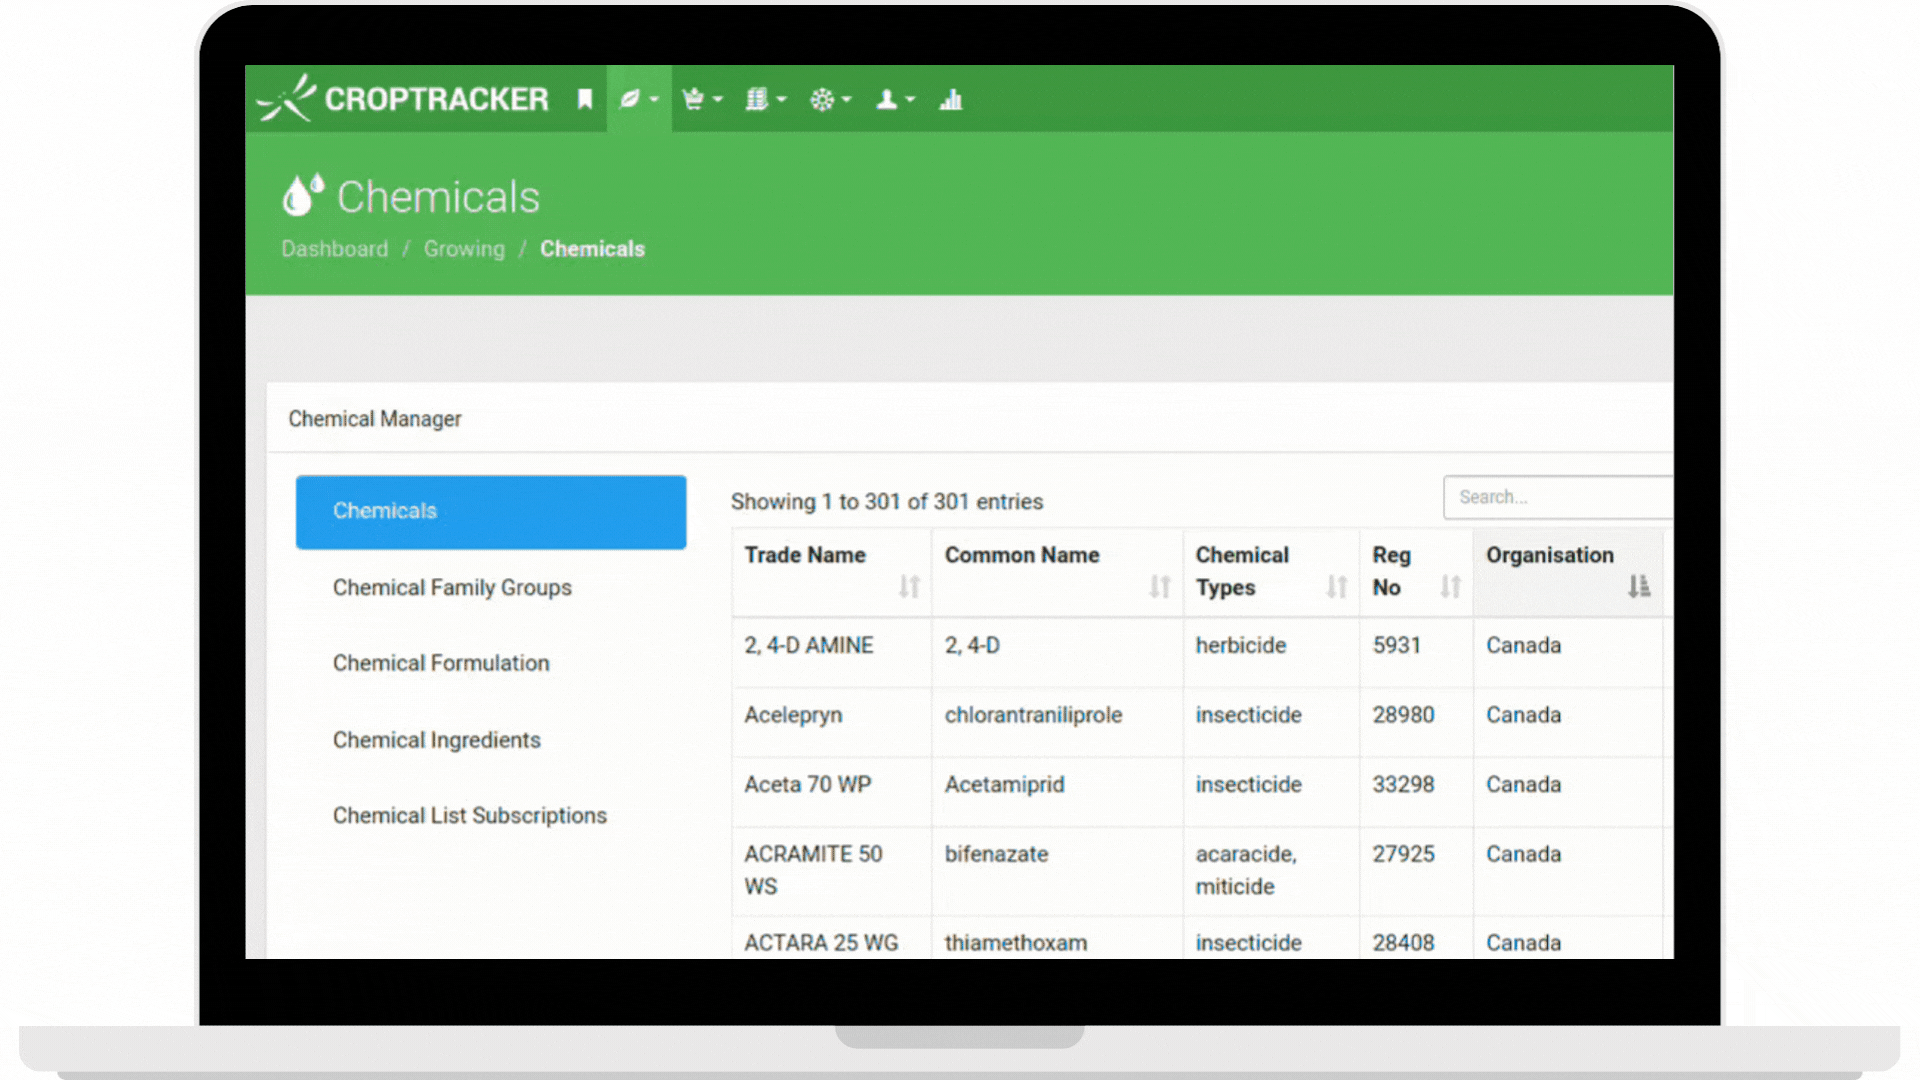 Viewing Croptracker's Chemical List